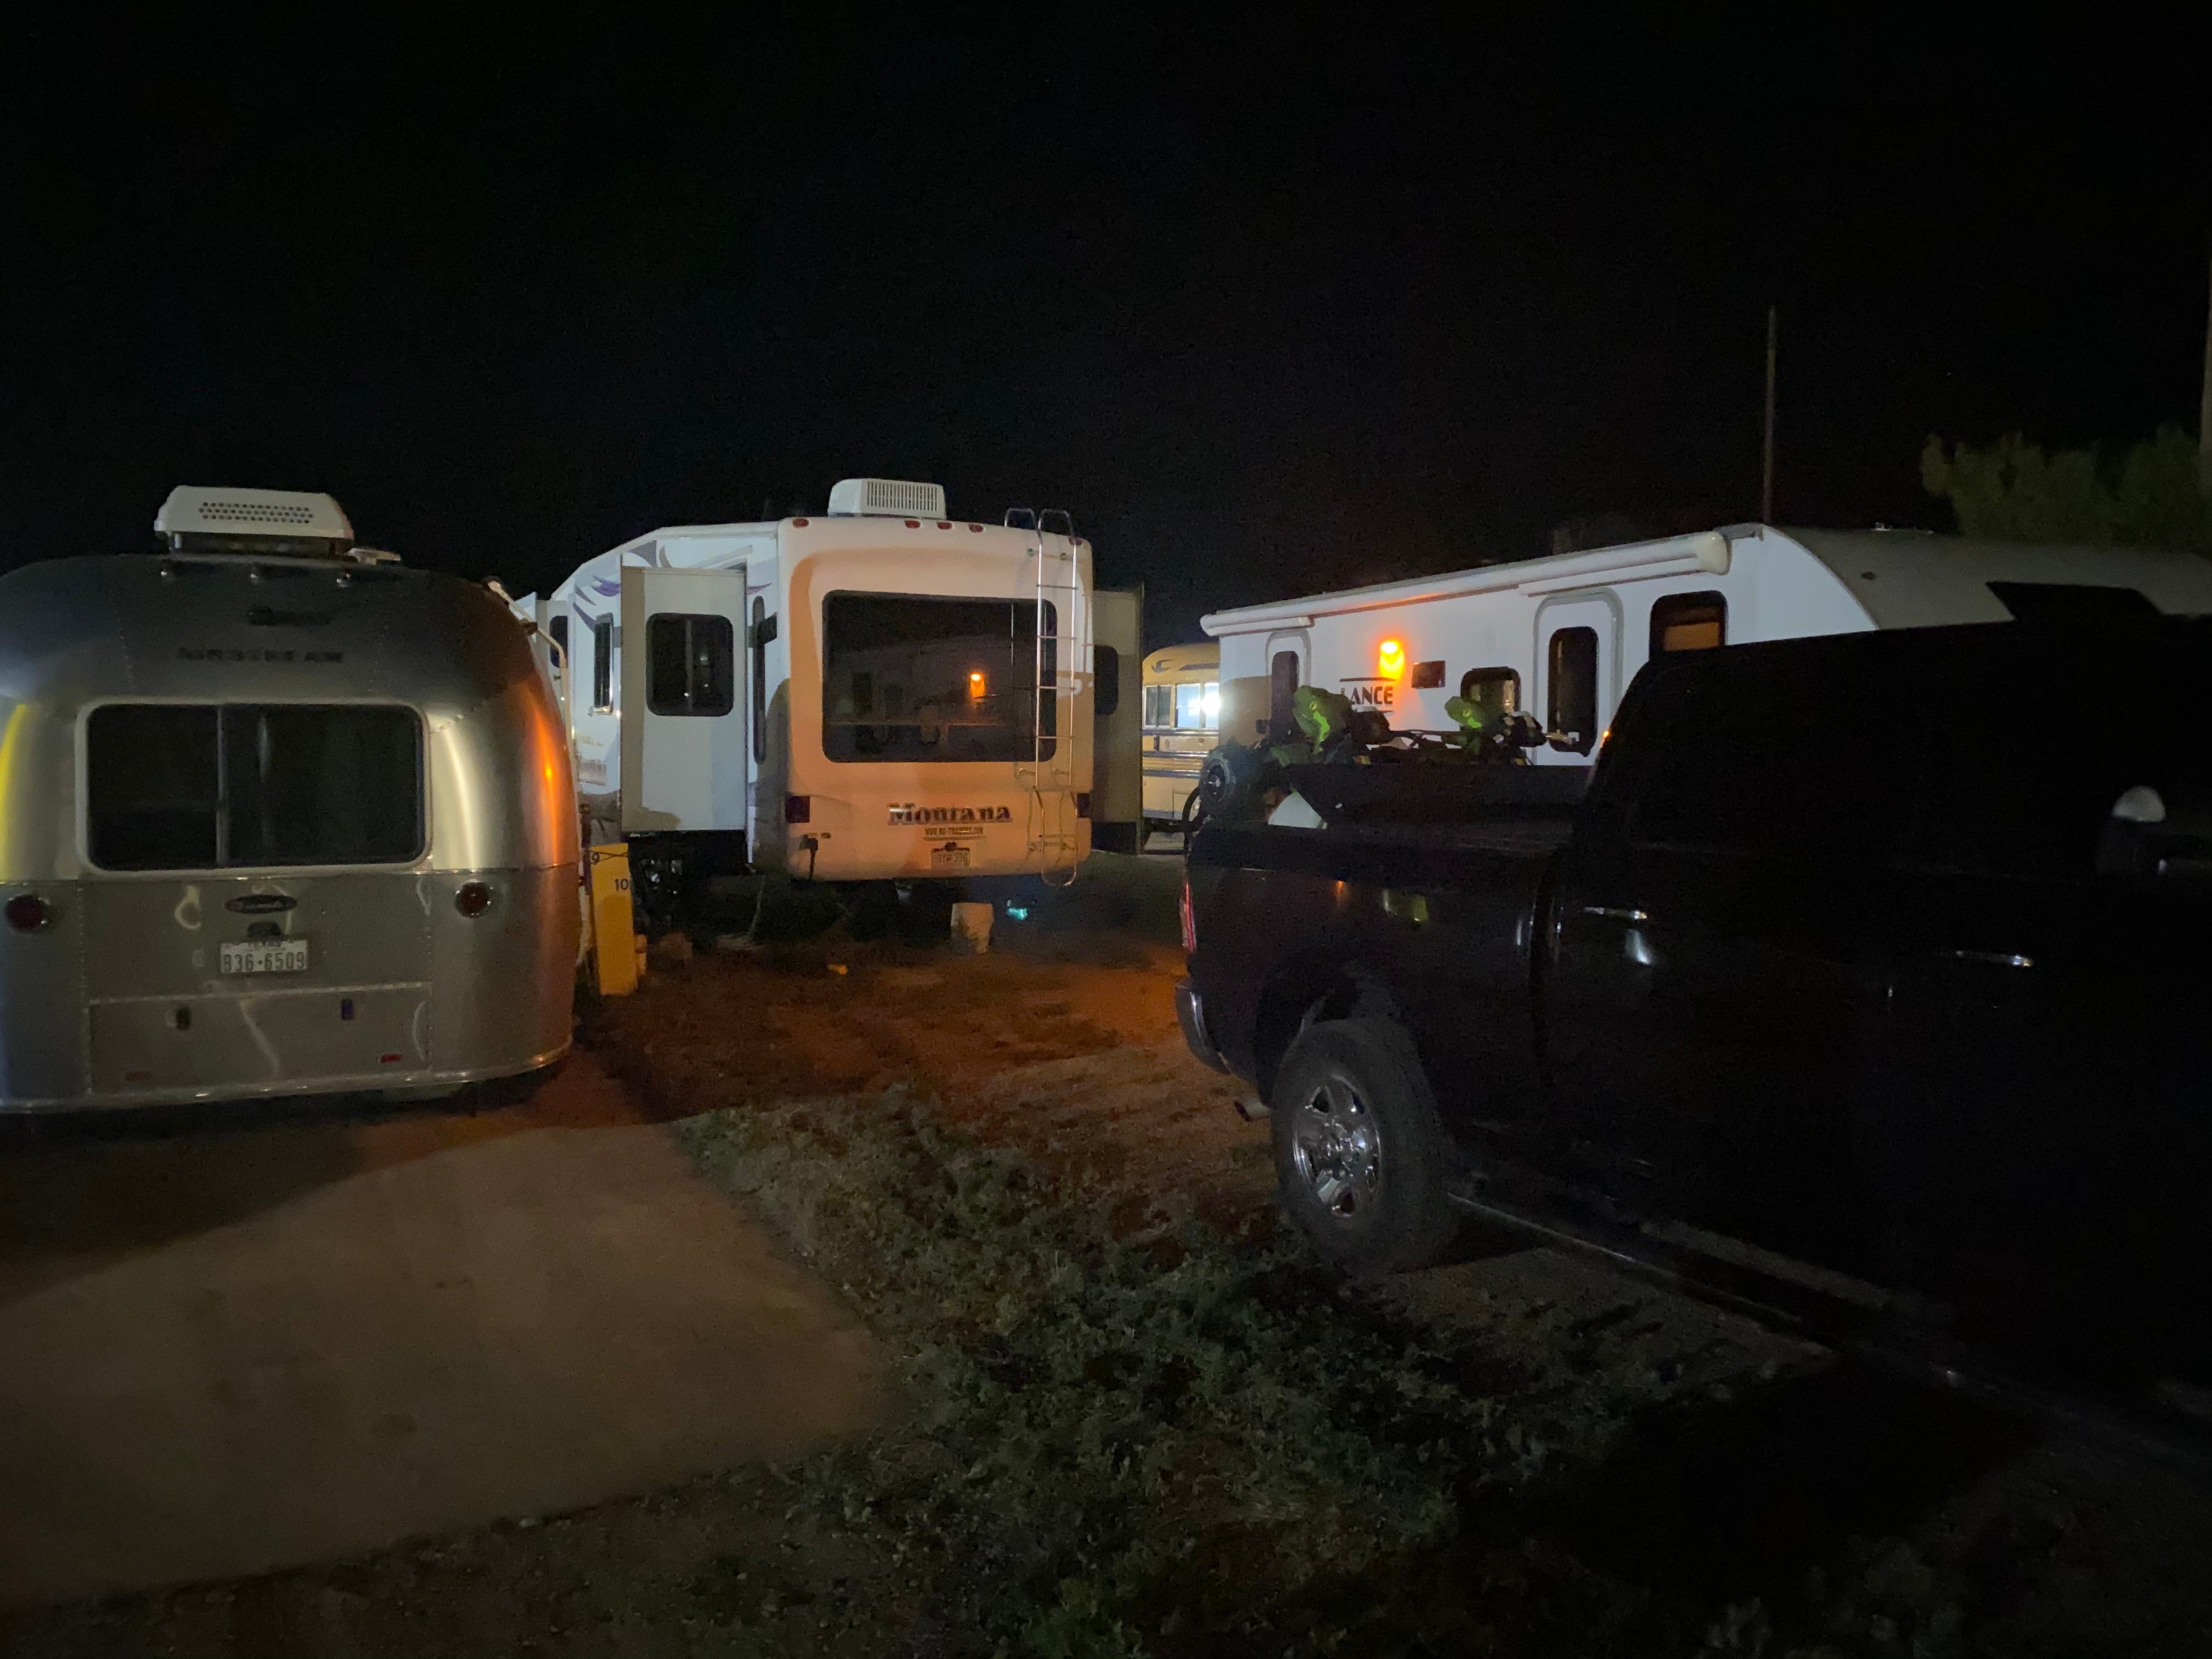 Camper submitted image from Tower 64 Motel & RV Park - 1